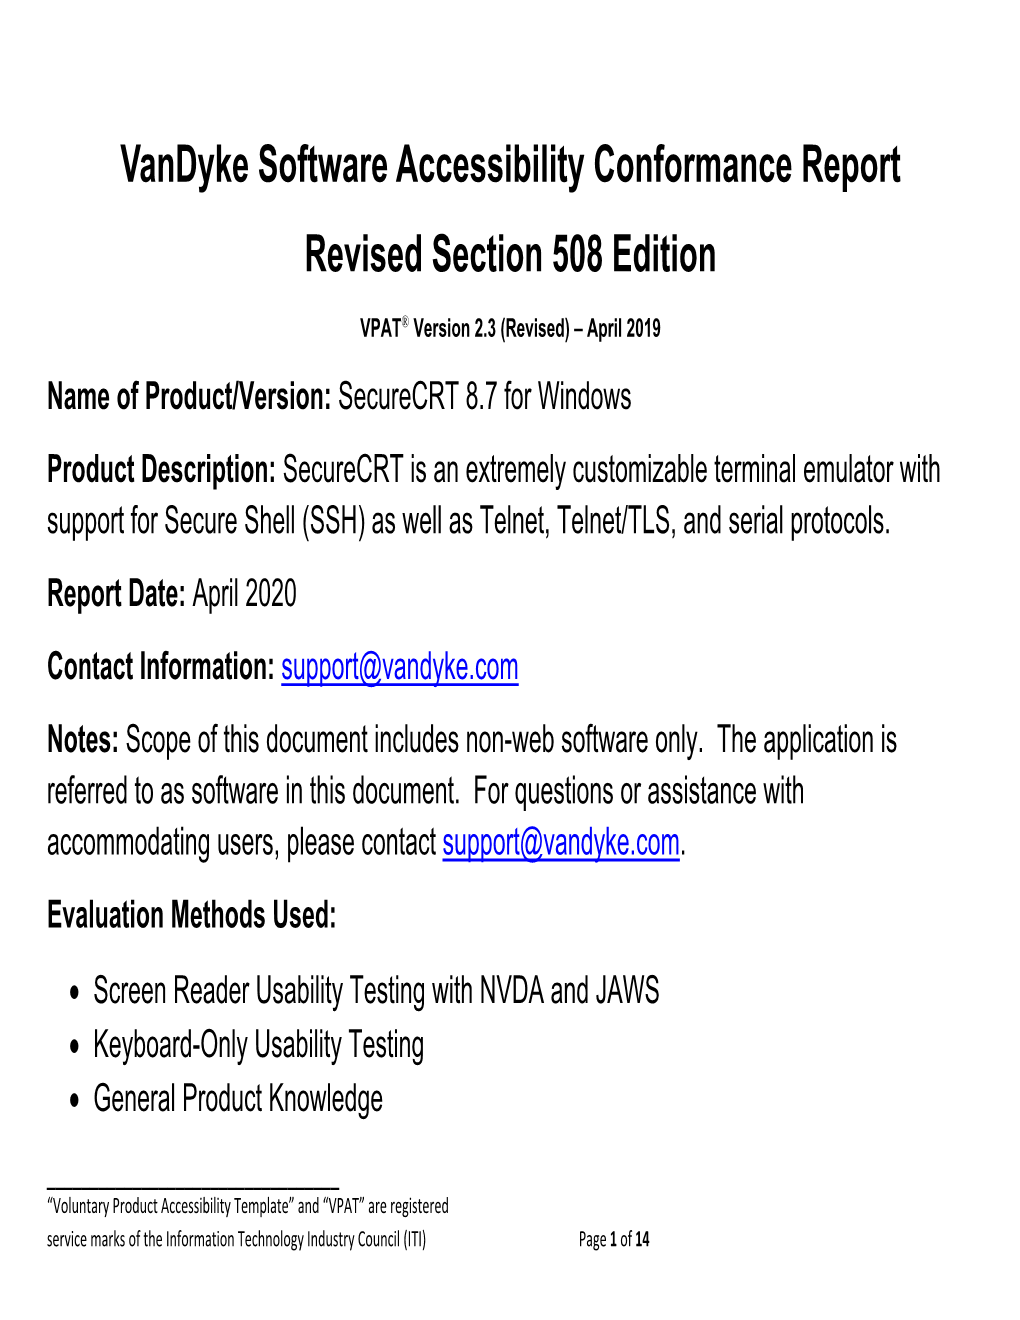 Vandyke Software Accessibility Conformance Report Revised